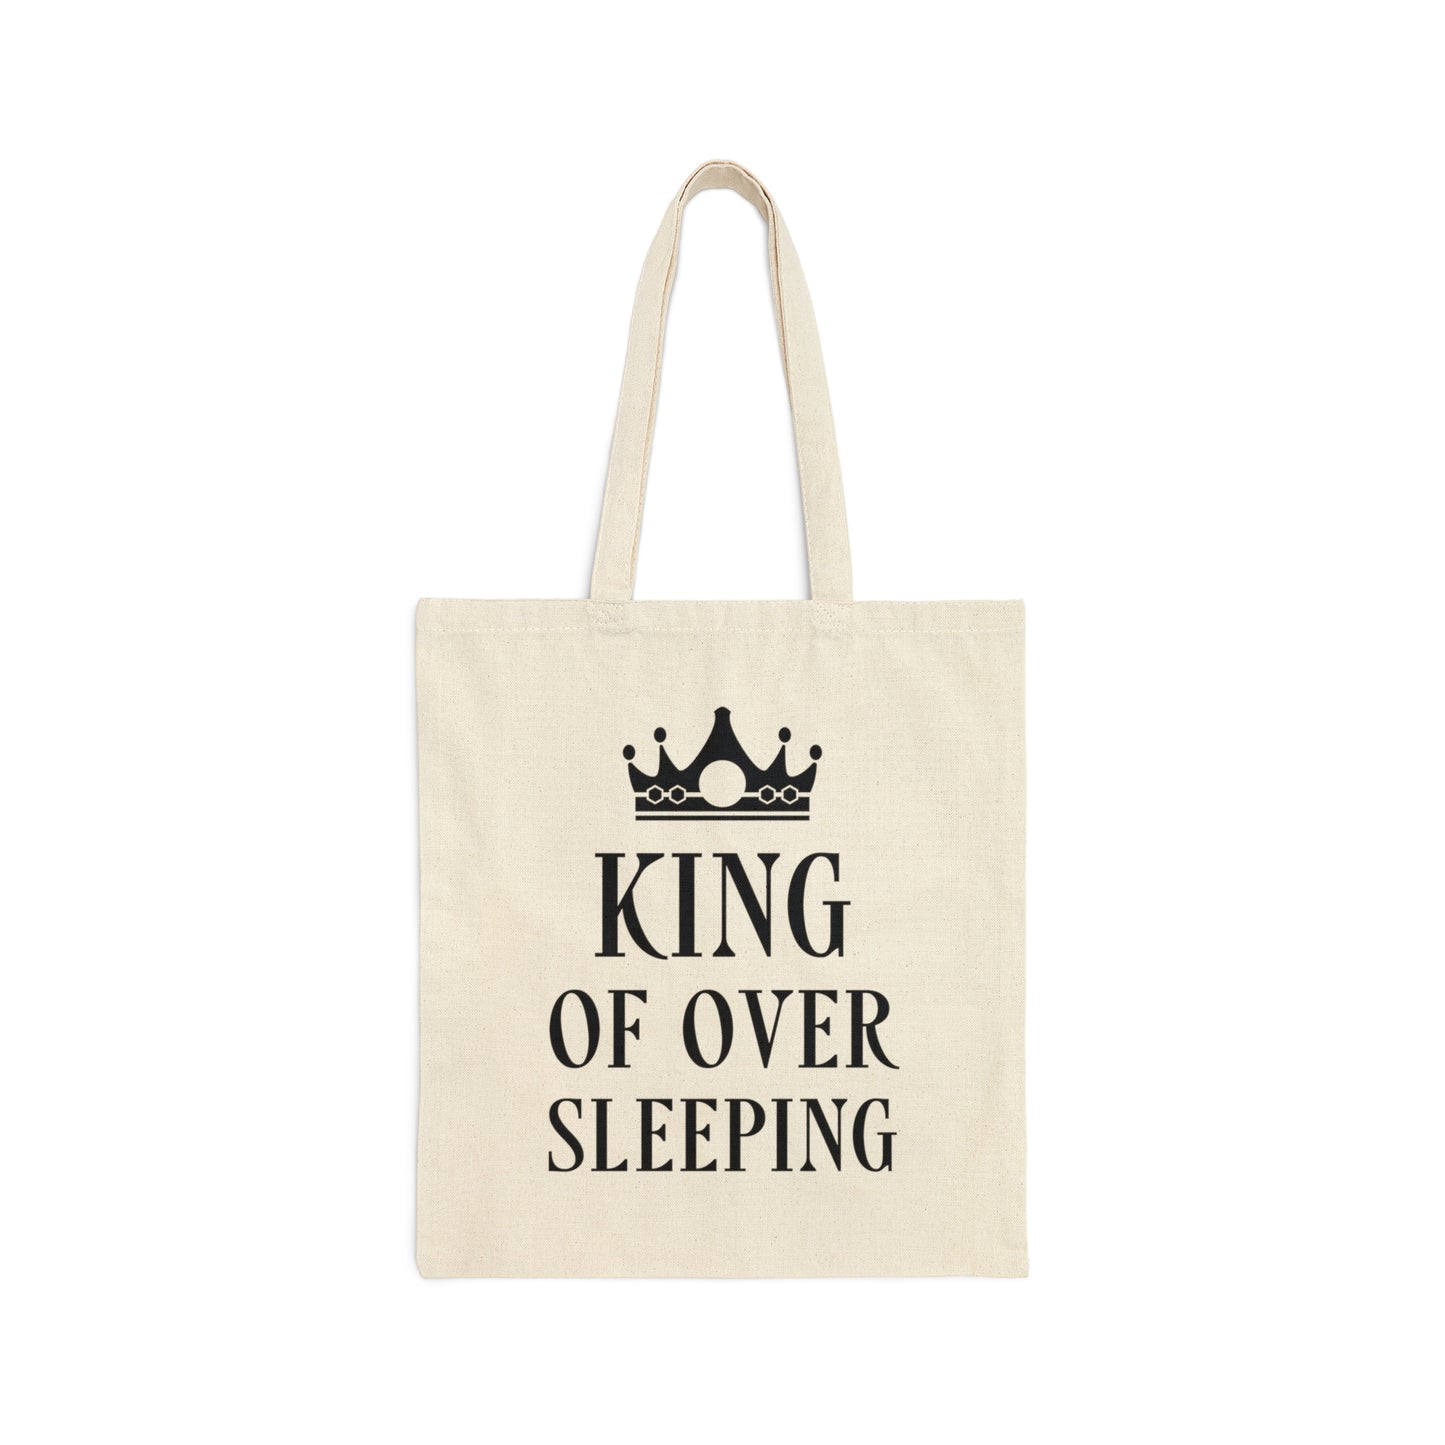 King of Over Sleeping Sleep Humor Quotes Canvas Shopping Cotton Tote Bag